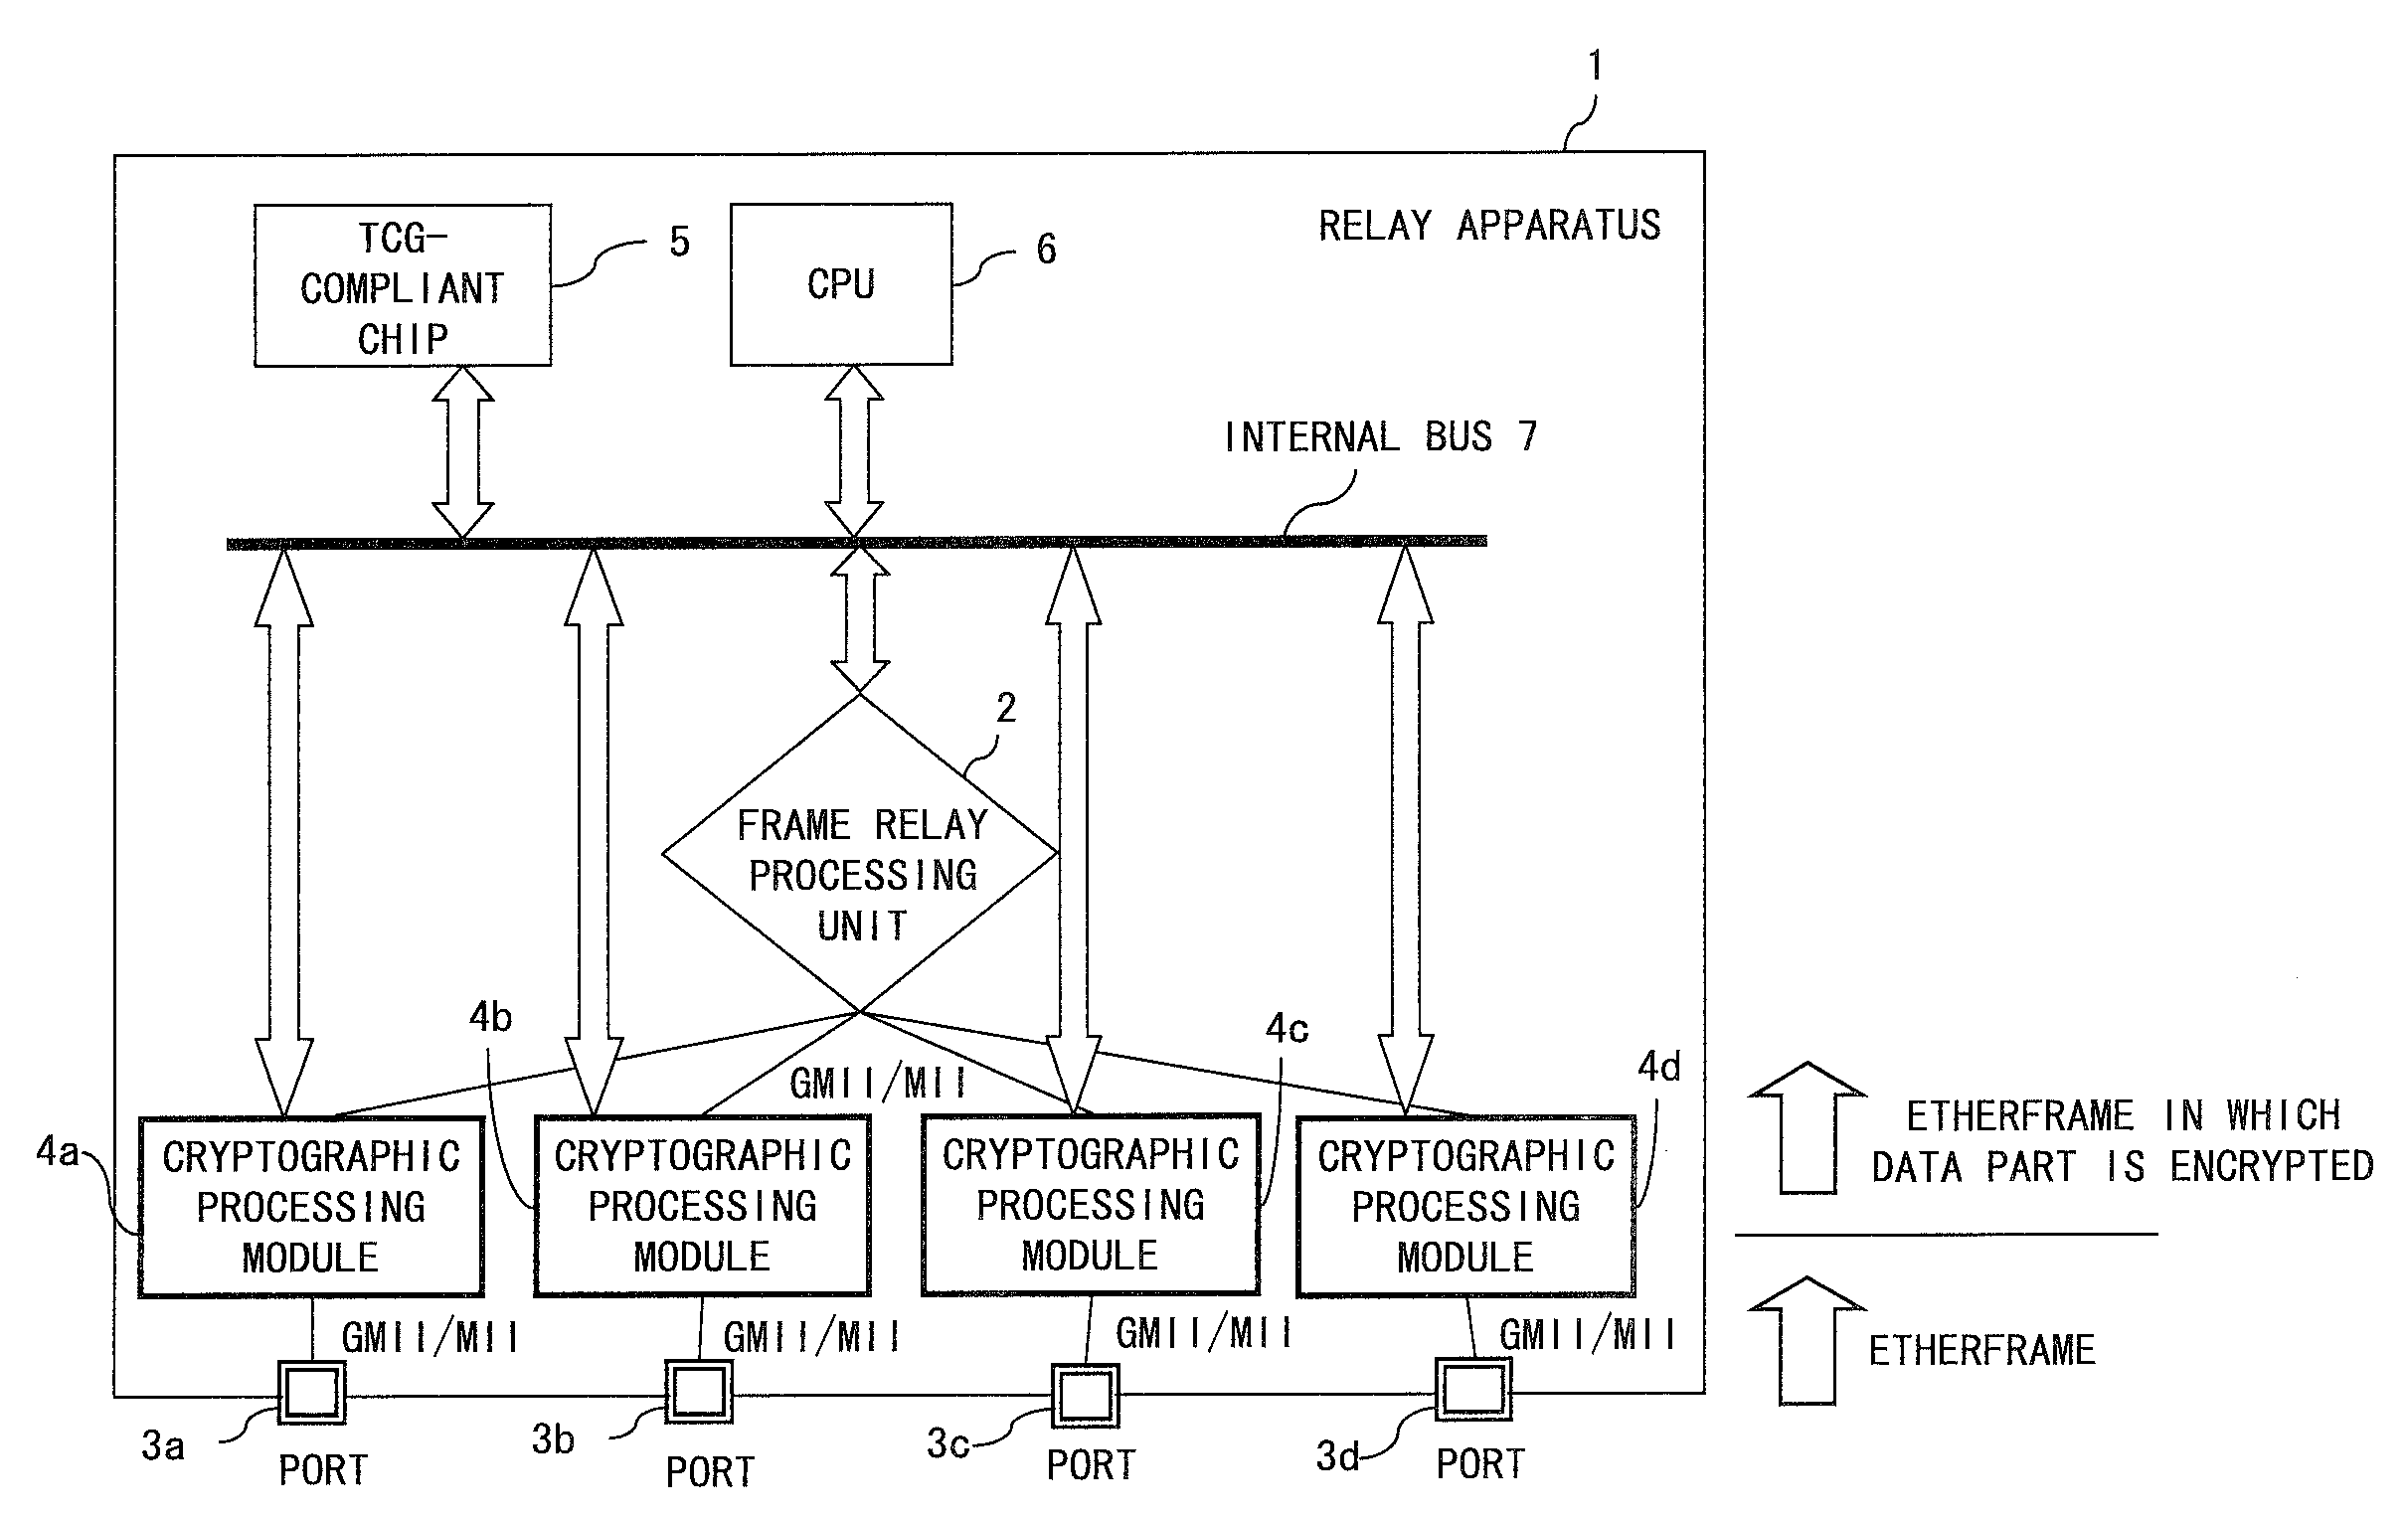 Relay apparatus for encrypting and relaying a frame